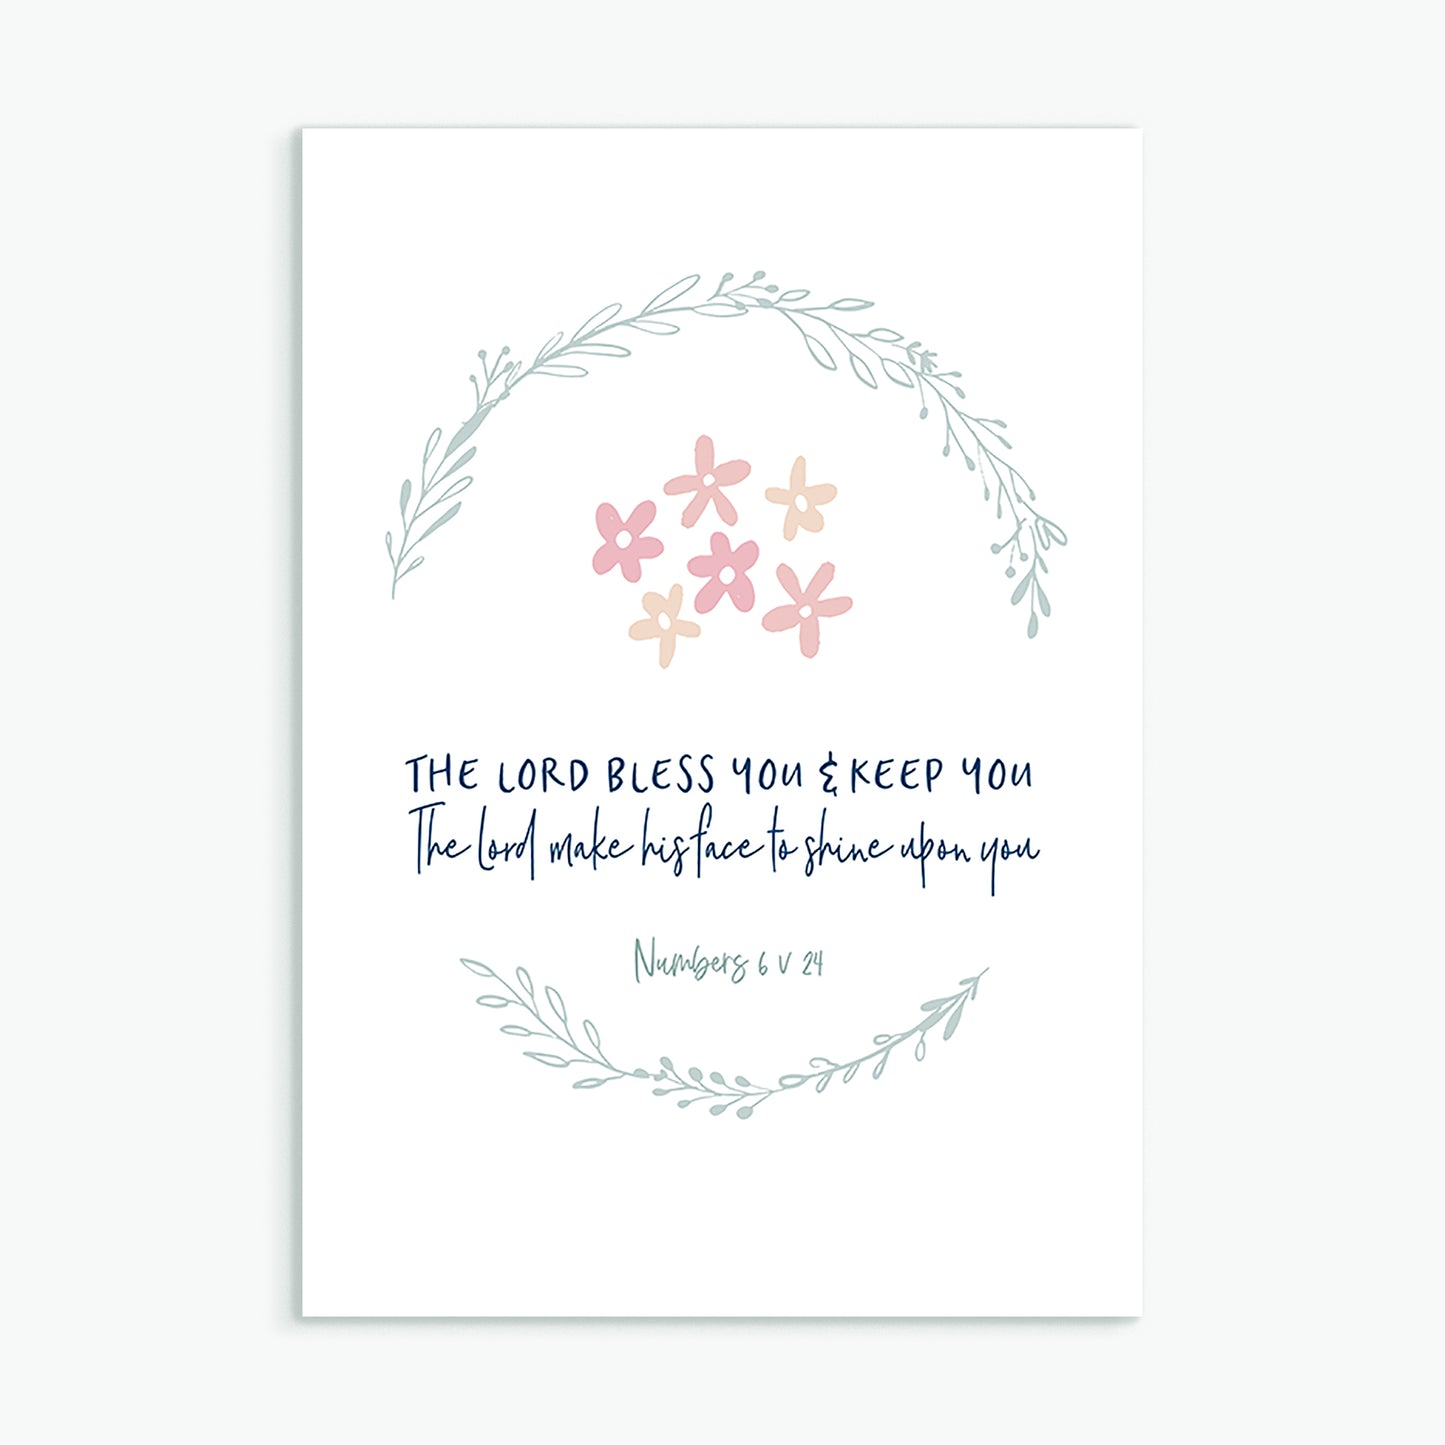 The Lord bless you greeting card